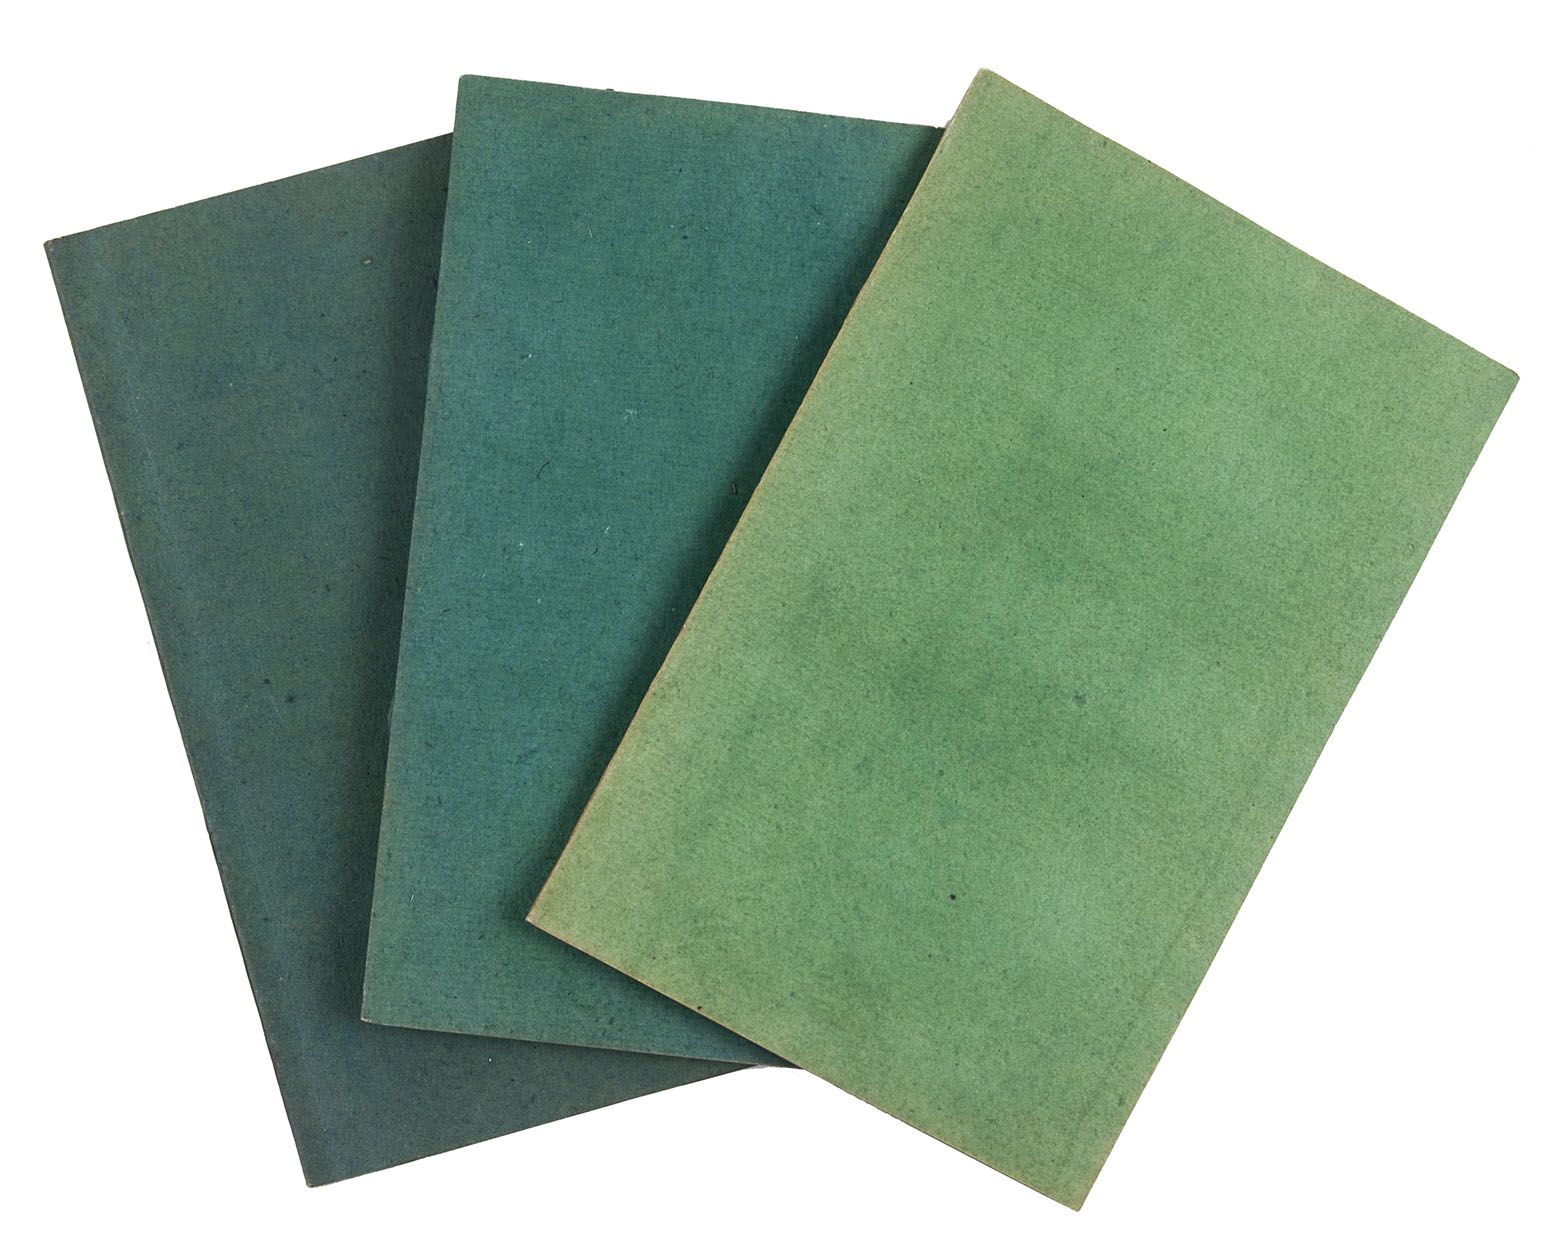 SALM-REIFFERSCHEID-DYCK, Joseph. - Observationes botanicae in Horto Dyckensi notatae. Cologne, Th. Fr. Thiriart, 1820-1822. 3 volumes. Small 8vo (15.5 x 9.5 cm). Contemporary green paper wrappers.